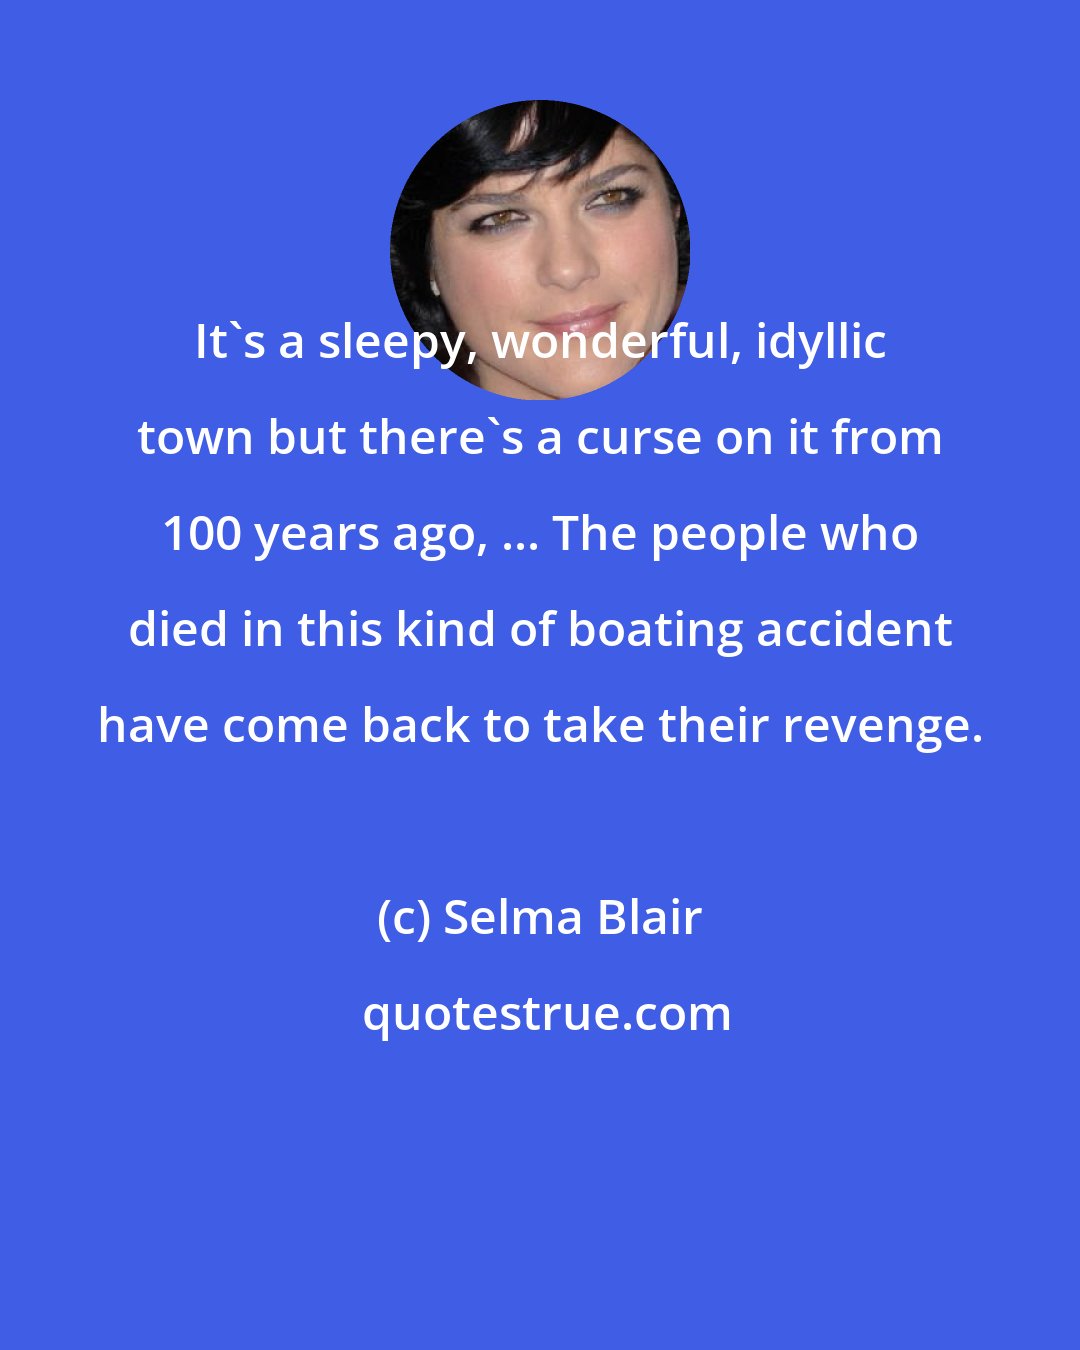 Selma Blair: It's a sleepy, wonderful, idyllic town but there's a curse on it from 100 years ago, ... The people who died in this kind of boating accident have come back to take their revenge.